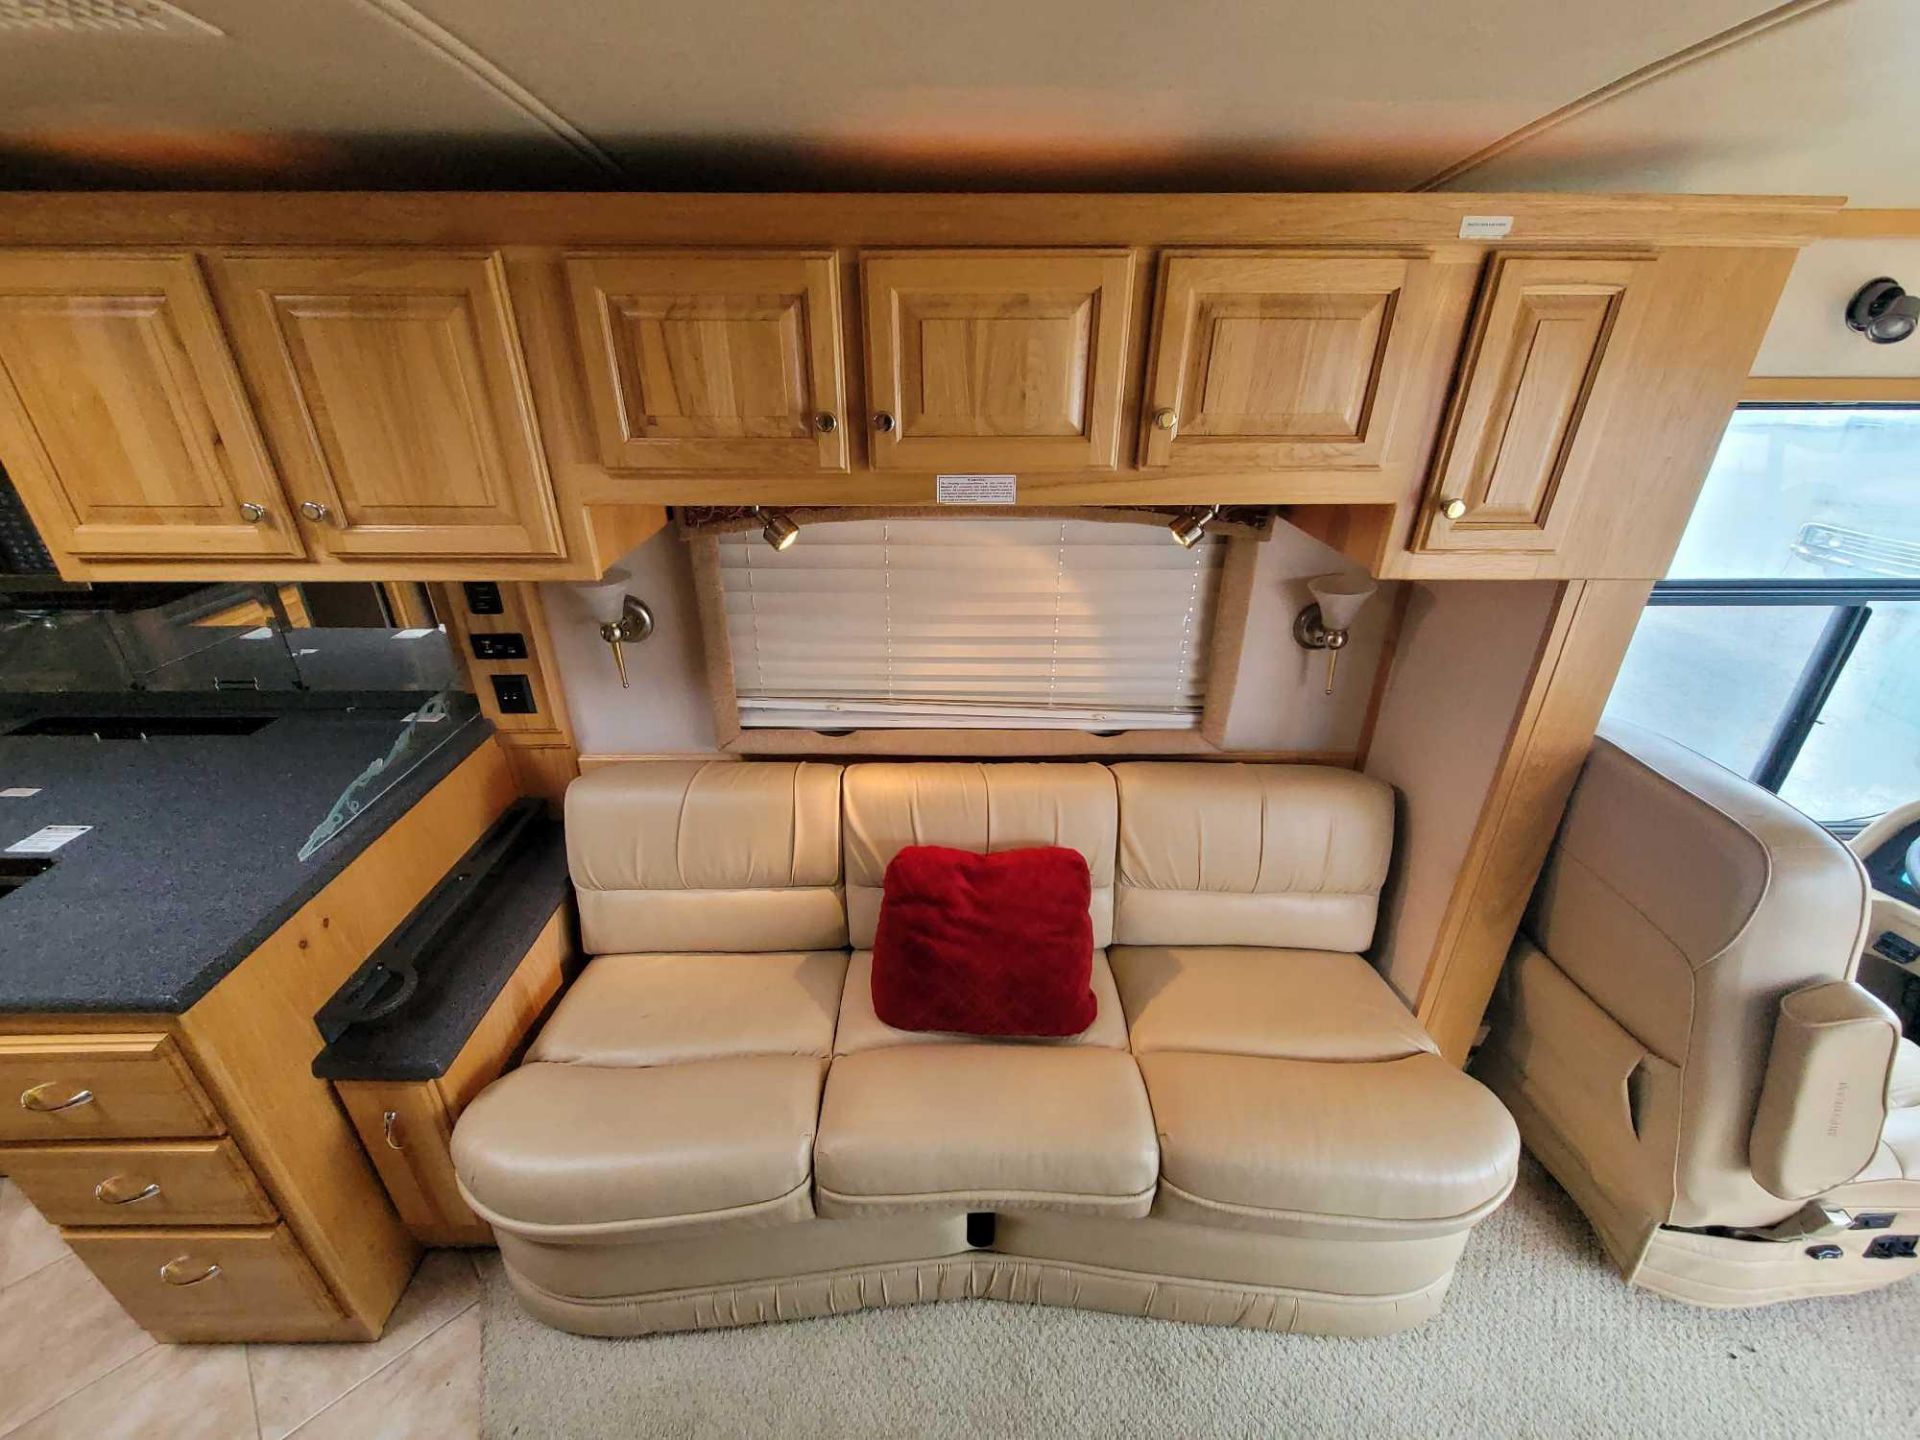 (SUBJECT TO OWNER CONFIRMATION) 2005 AirStream Land Yacht XL396 - Image 18 of 74